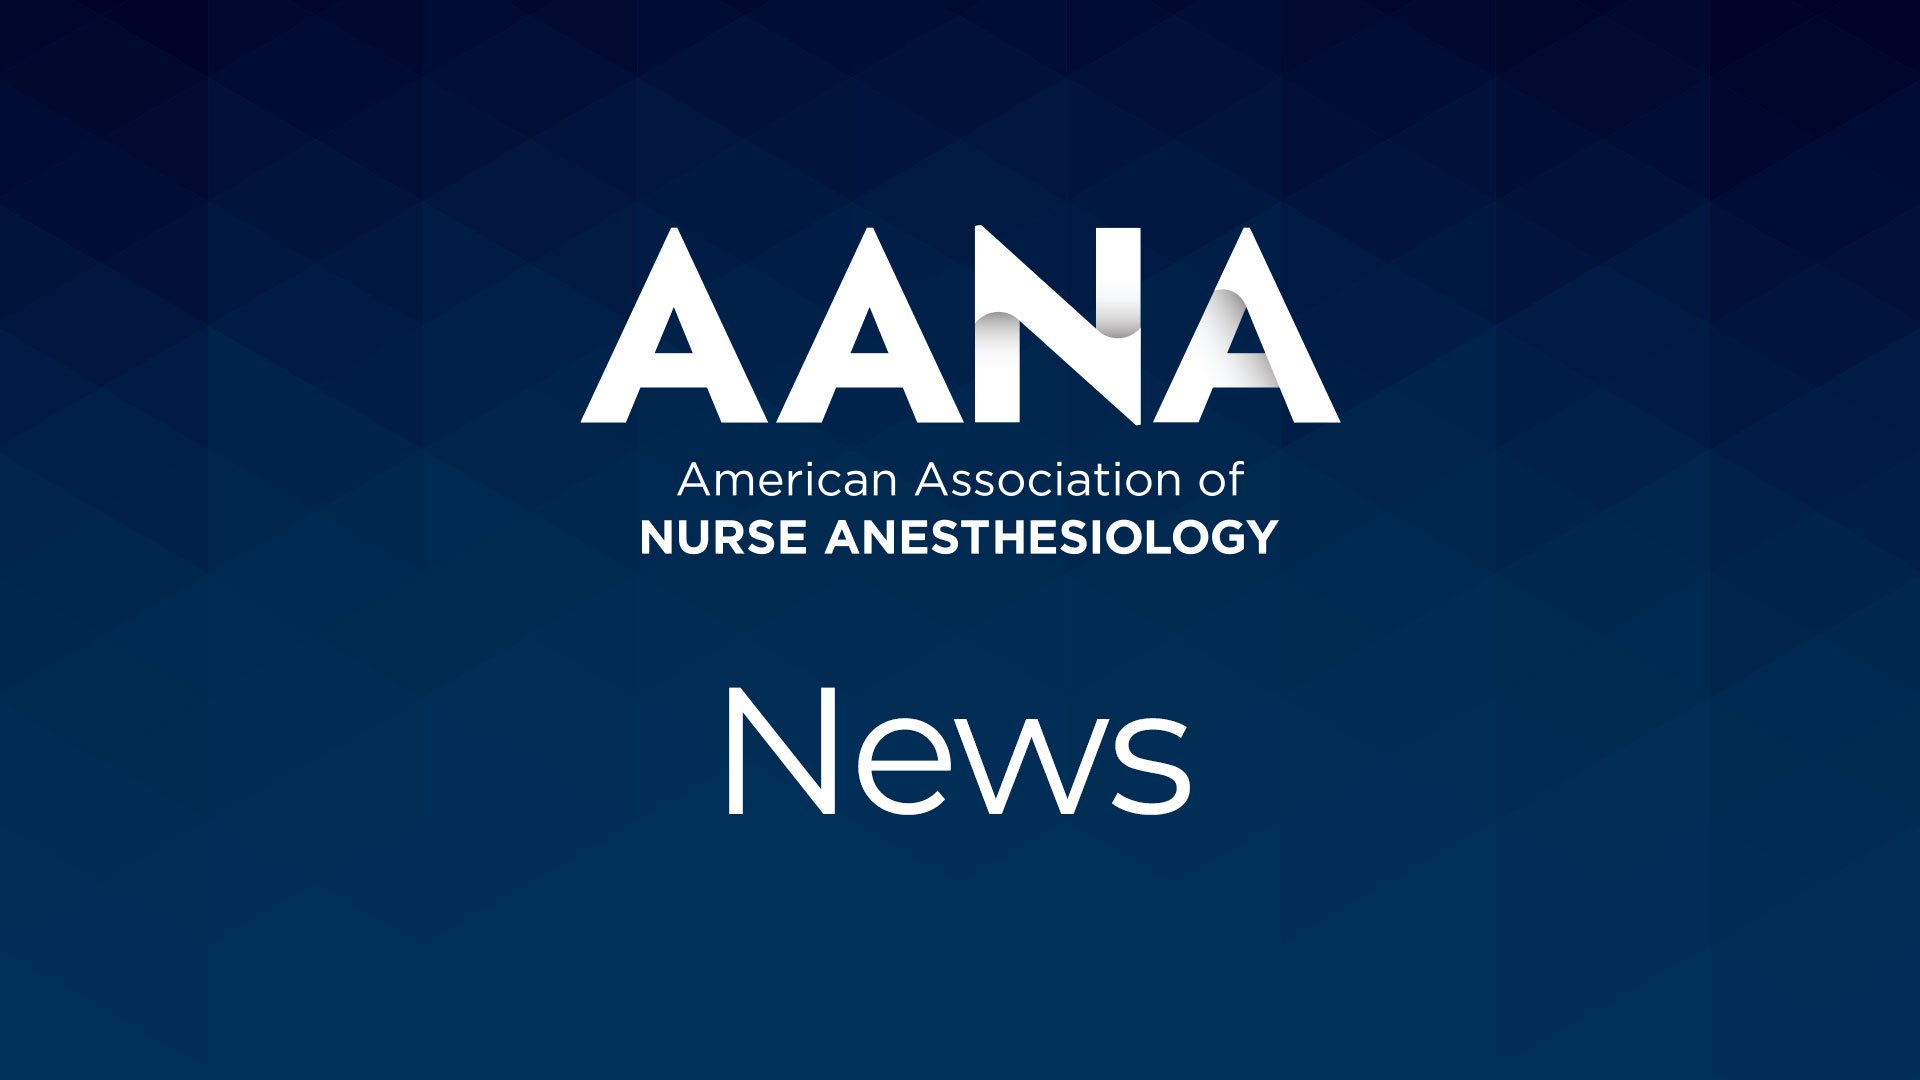 Conference for RRNAs sets residents up for success AANA American